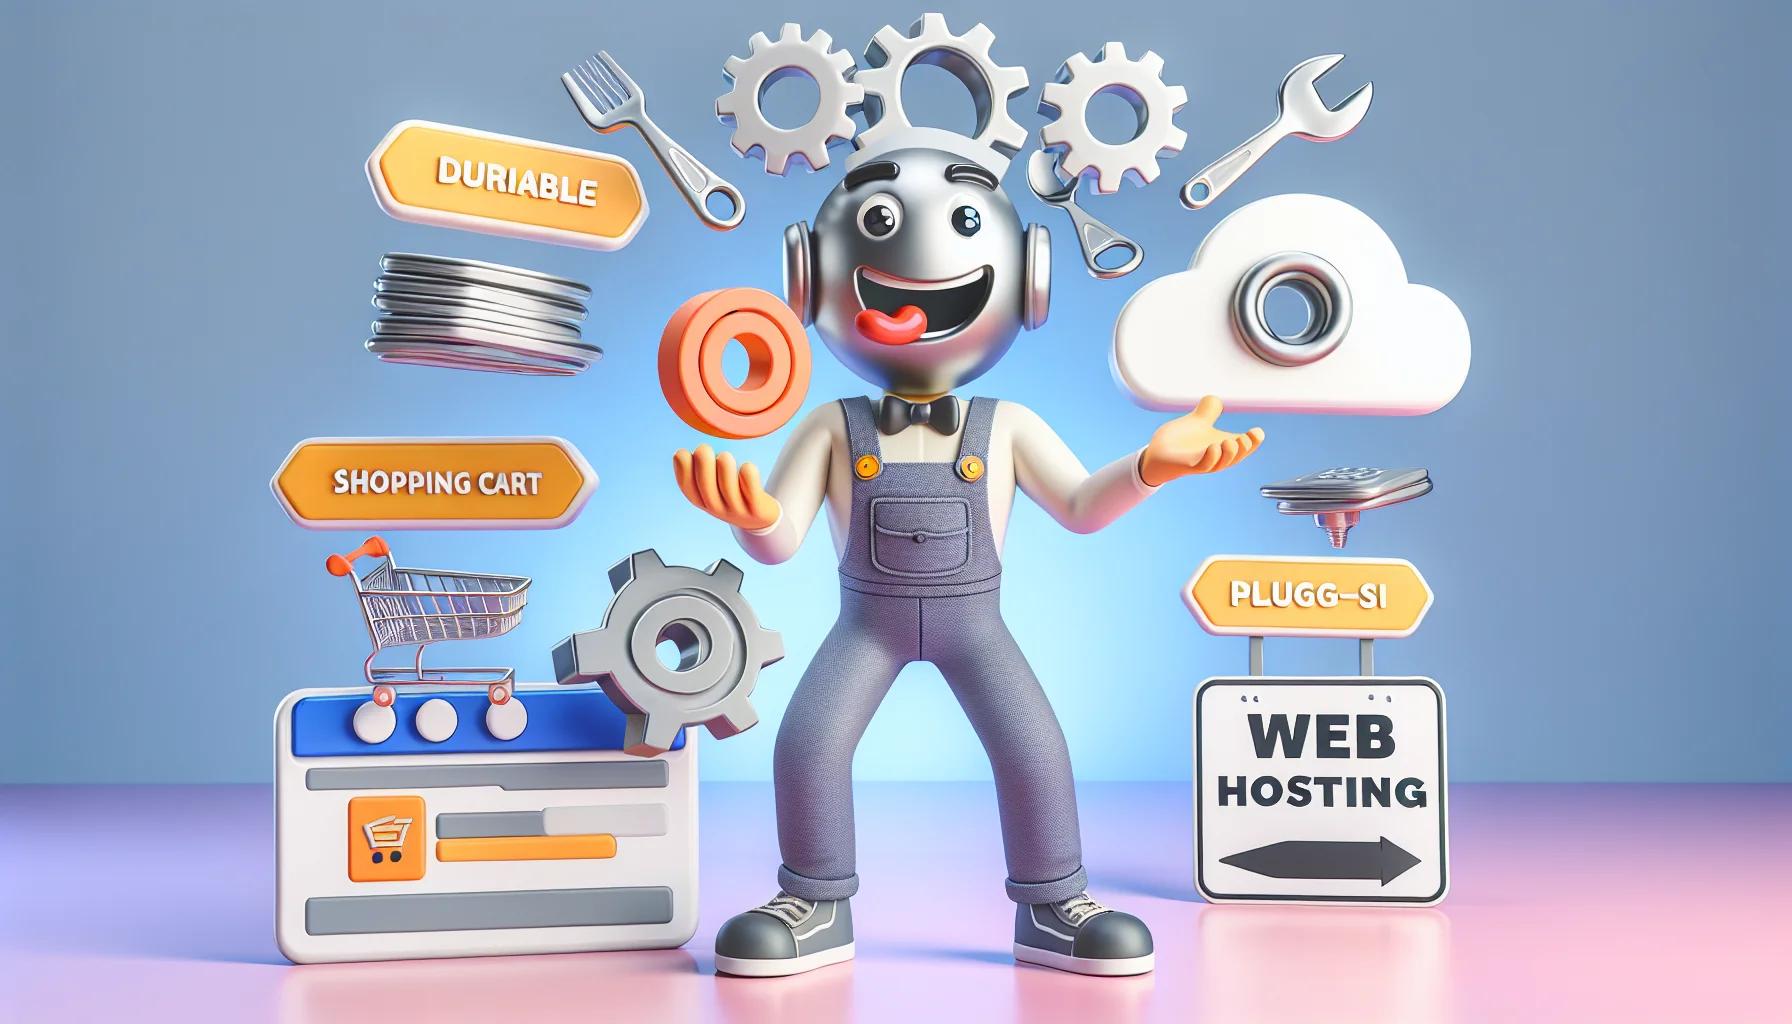 Create an image portraying a comedic scenario with a durable, anthropomorphized website builder. This character is engaged in a juggling act, playfully balancing web icons, such as a word cloud, shopping cart system, and a plug-in symbol. Meanwhile, an eager sign labeled 'web hosting' watches him with great interest, arched eyebrows and a giant smile sculpted on its face. The backdrop is full of soft pastel hues signifying a calm digital domain.